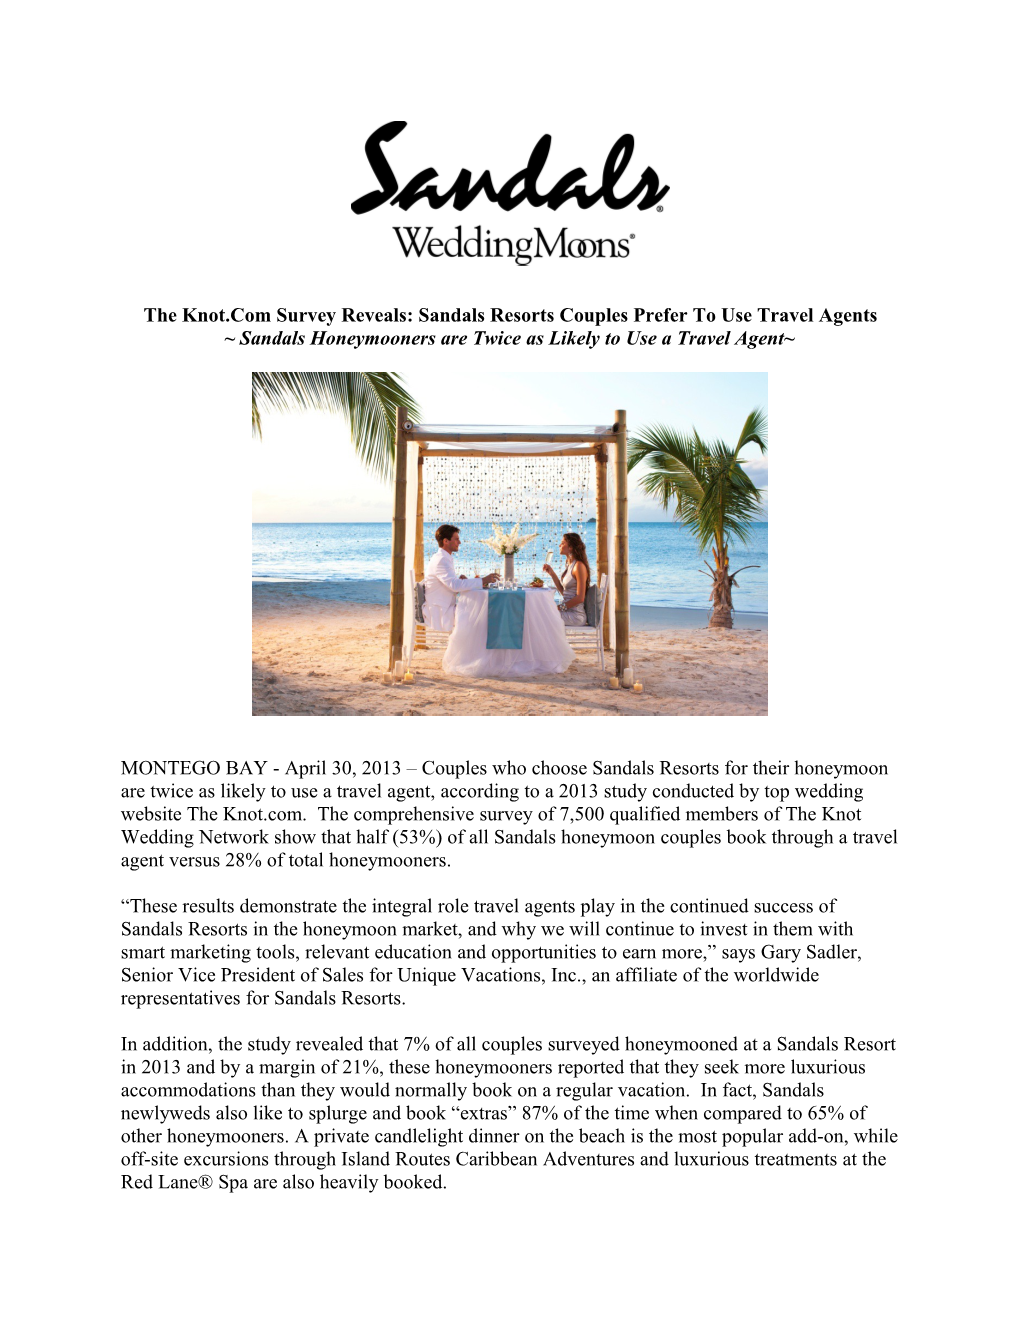 Sandals Honeymoonersare Twice As Likely to Use a Travel Agent